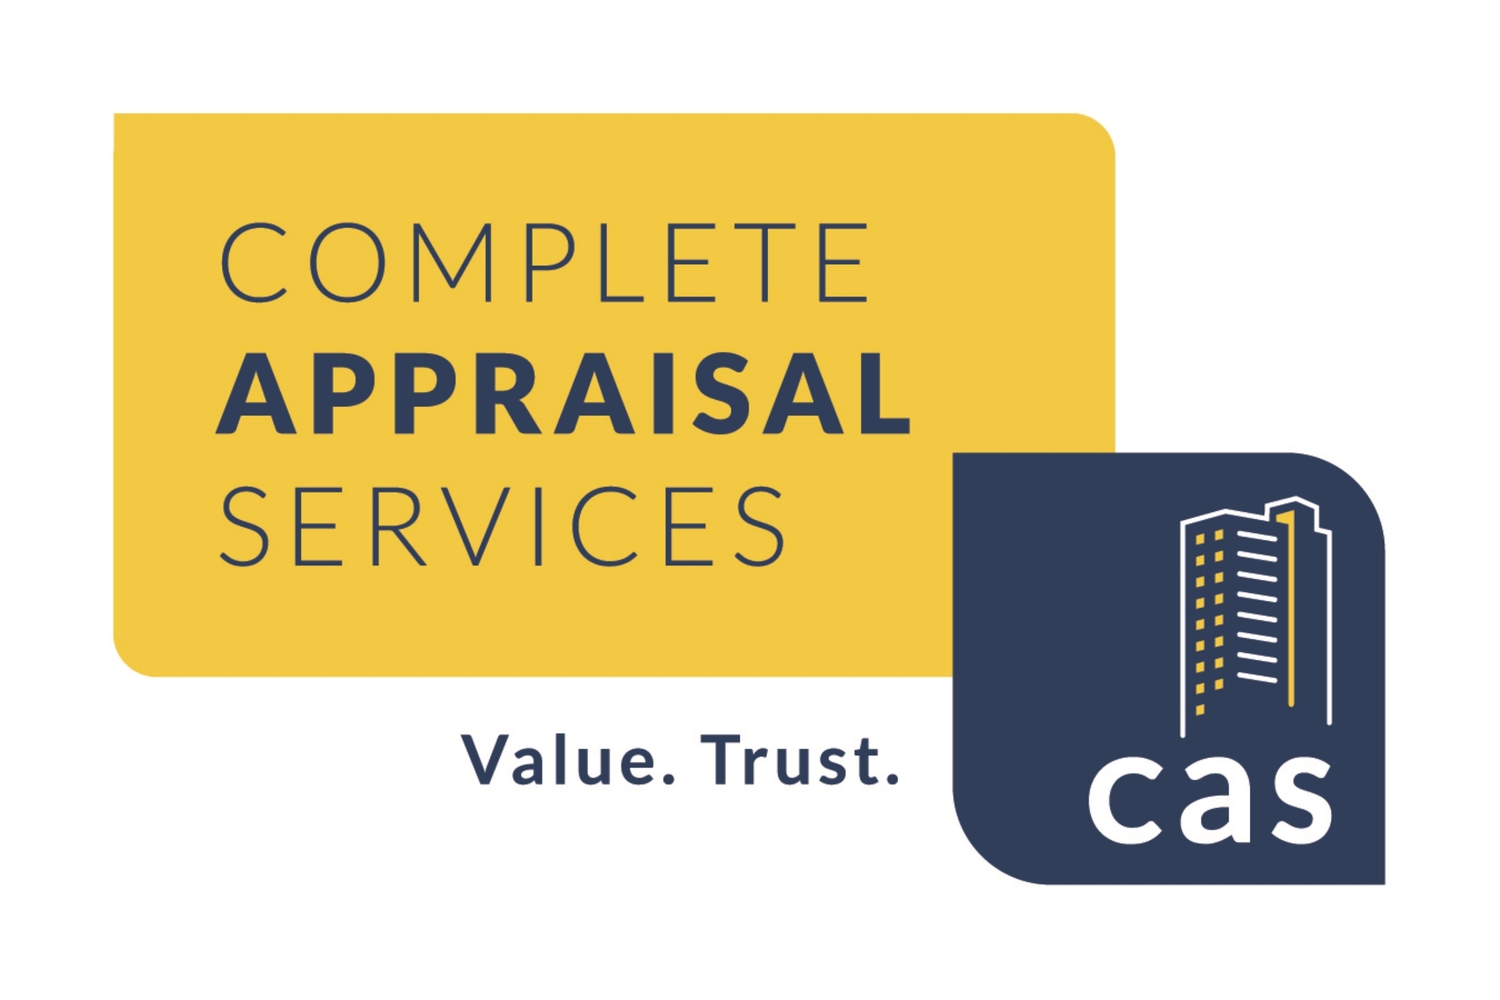 Complete Appraisal Services